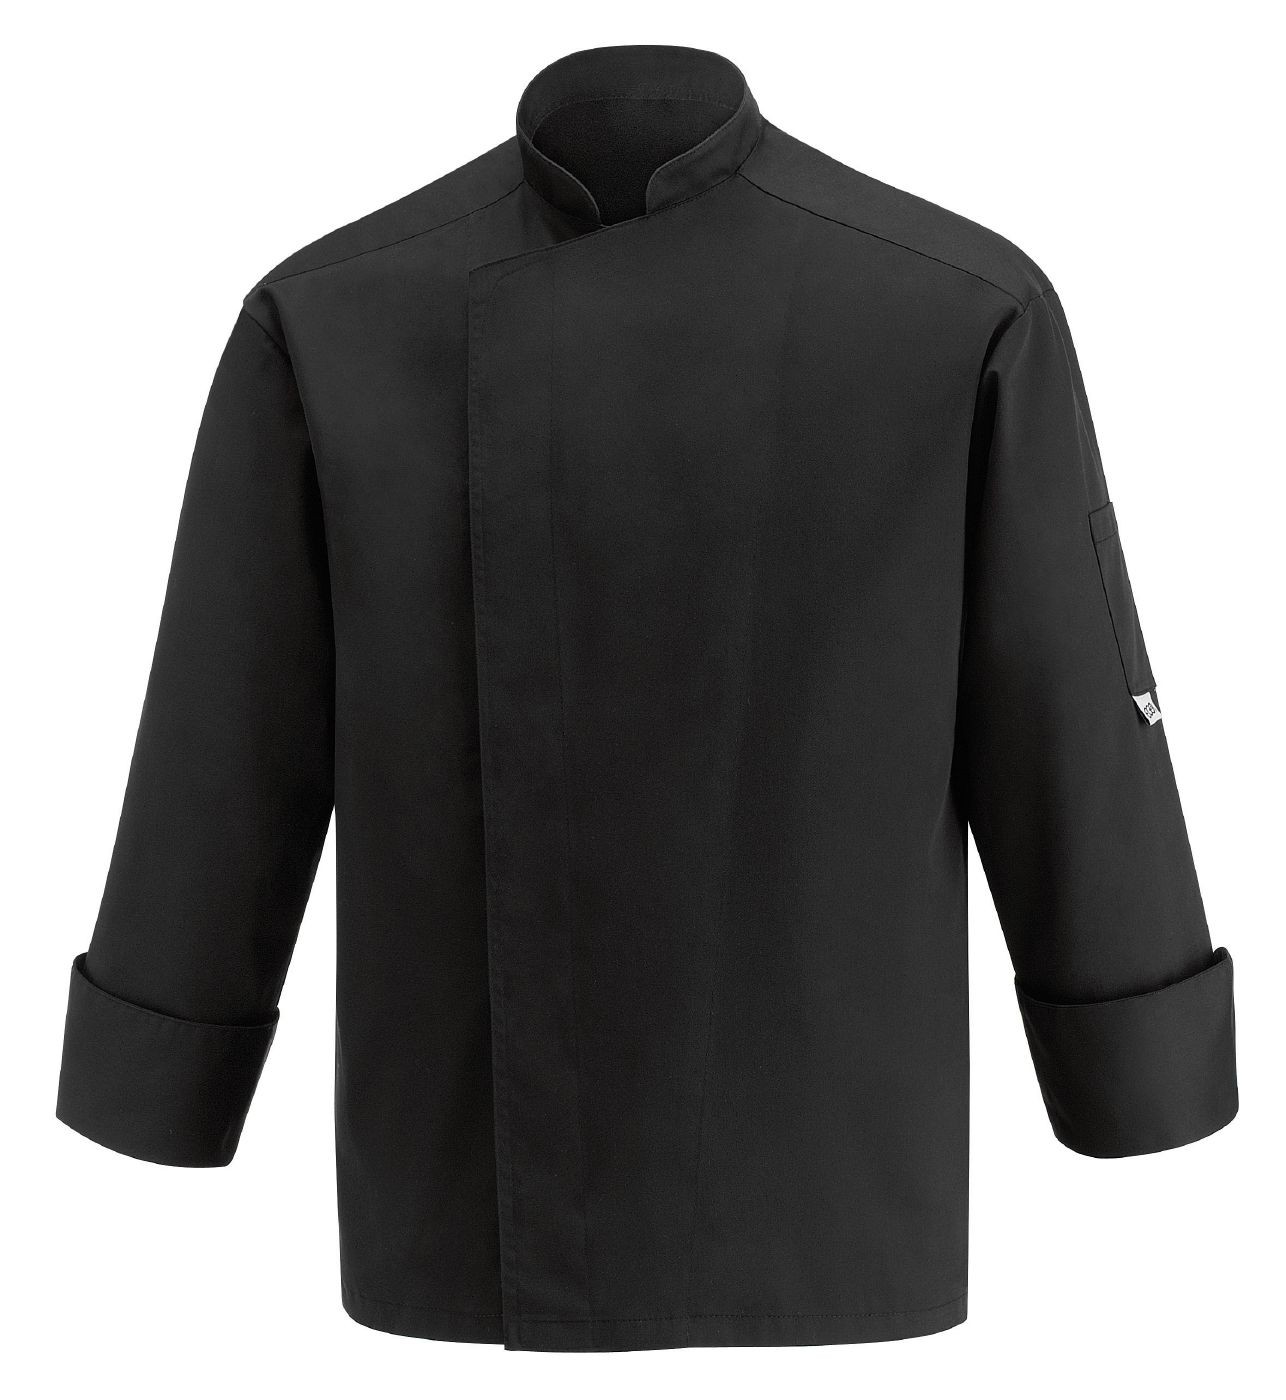 UNISEX CHEF JACKET WITH PRESS BUTTONS - BLACK